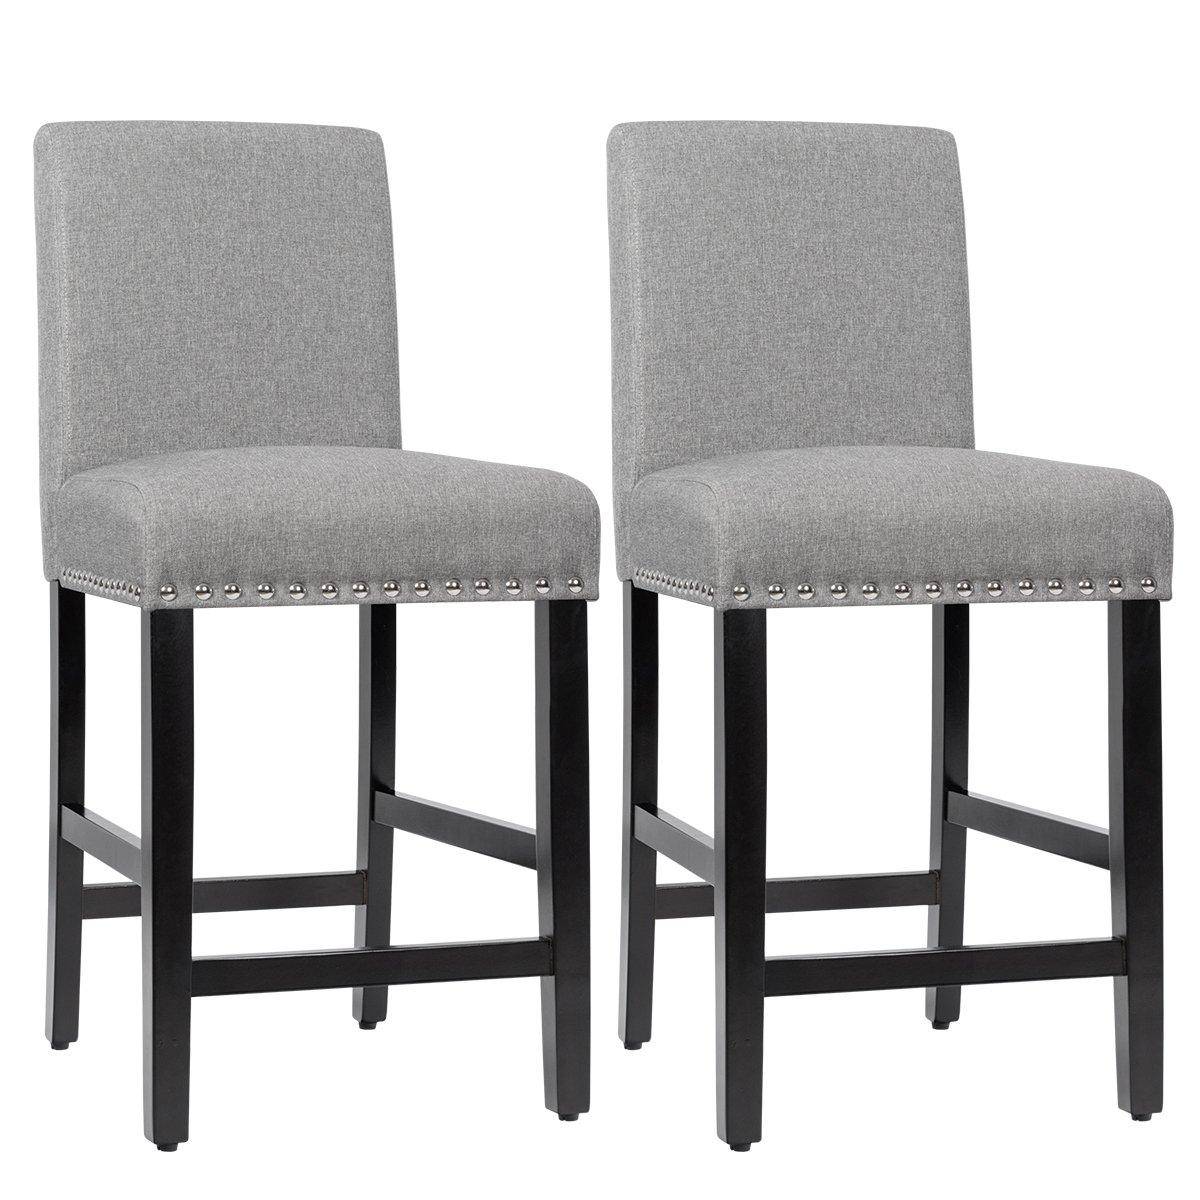 Set of 2 Bar Stools Counter Height Chair Upholstered W/ Low Backrest & Wide Seat